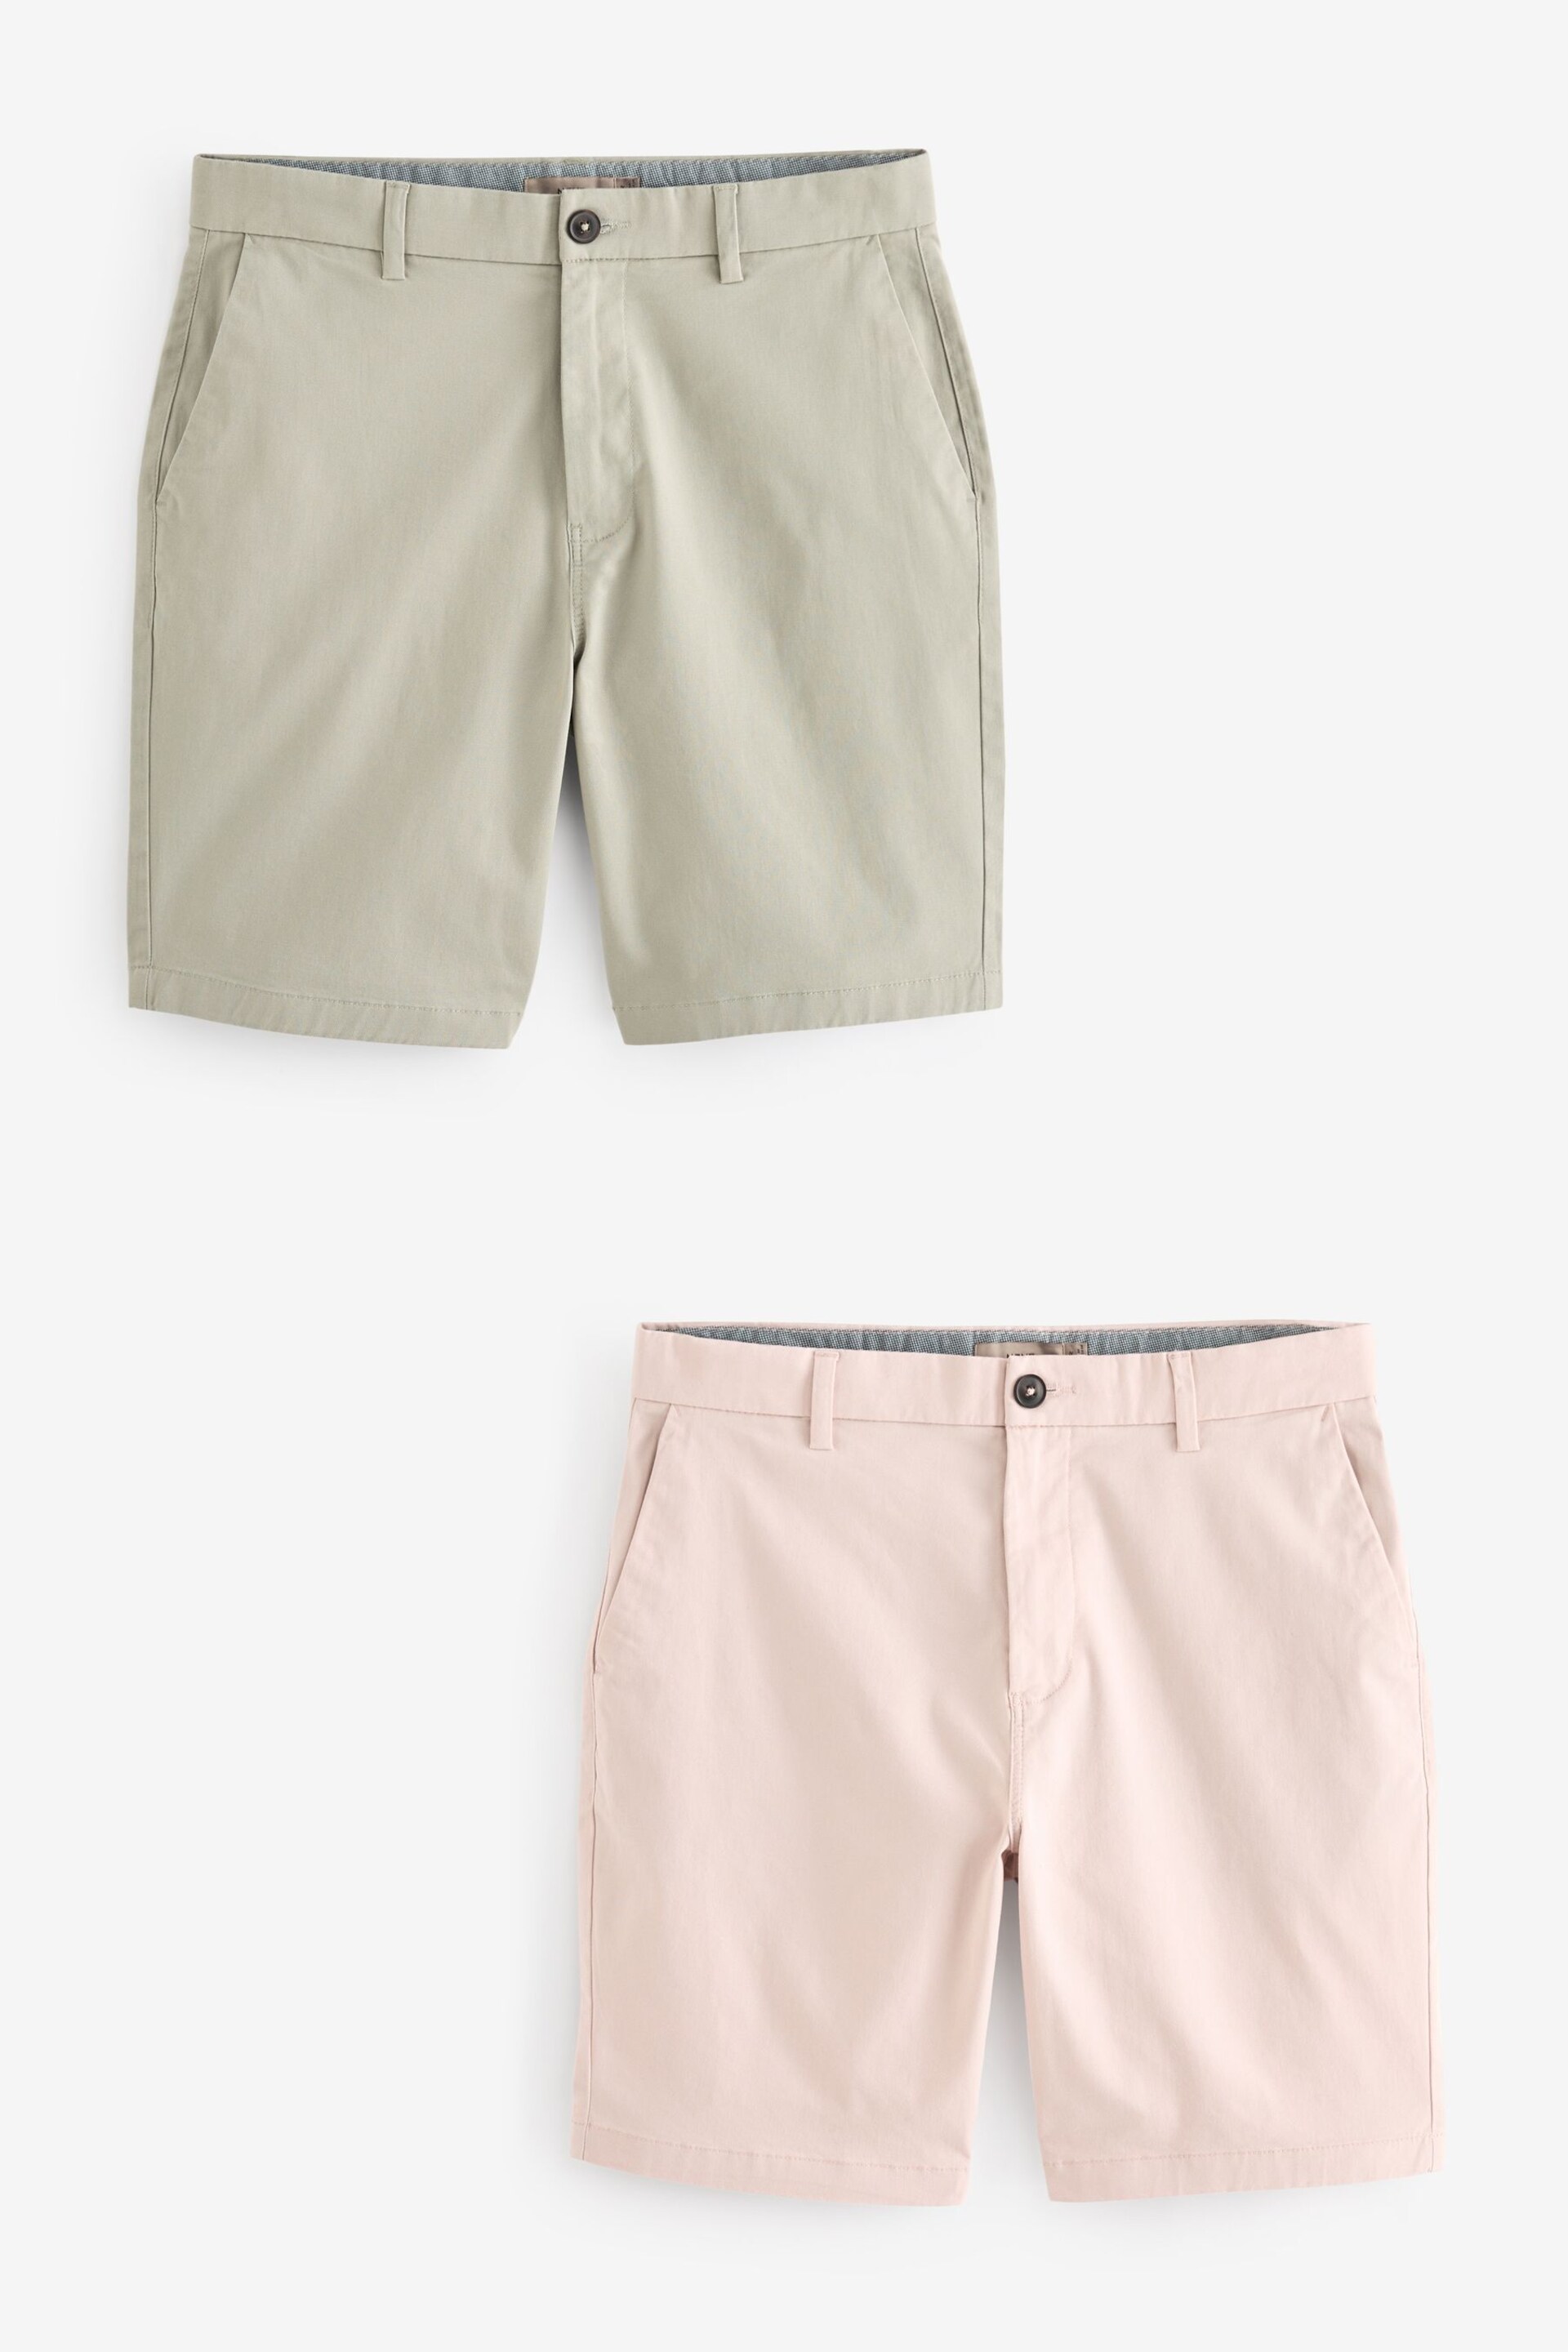 Green/Pink Slim Fit Stretch Chinos Shorts 2 Pack - Image 6 of 11